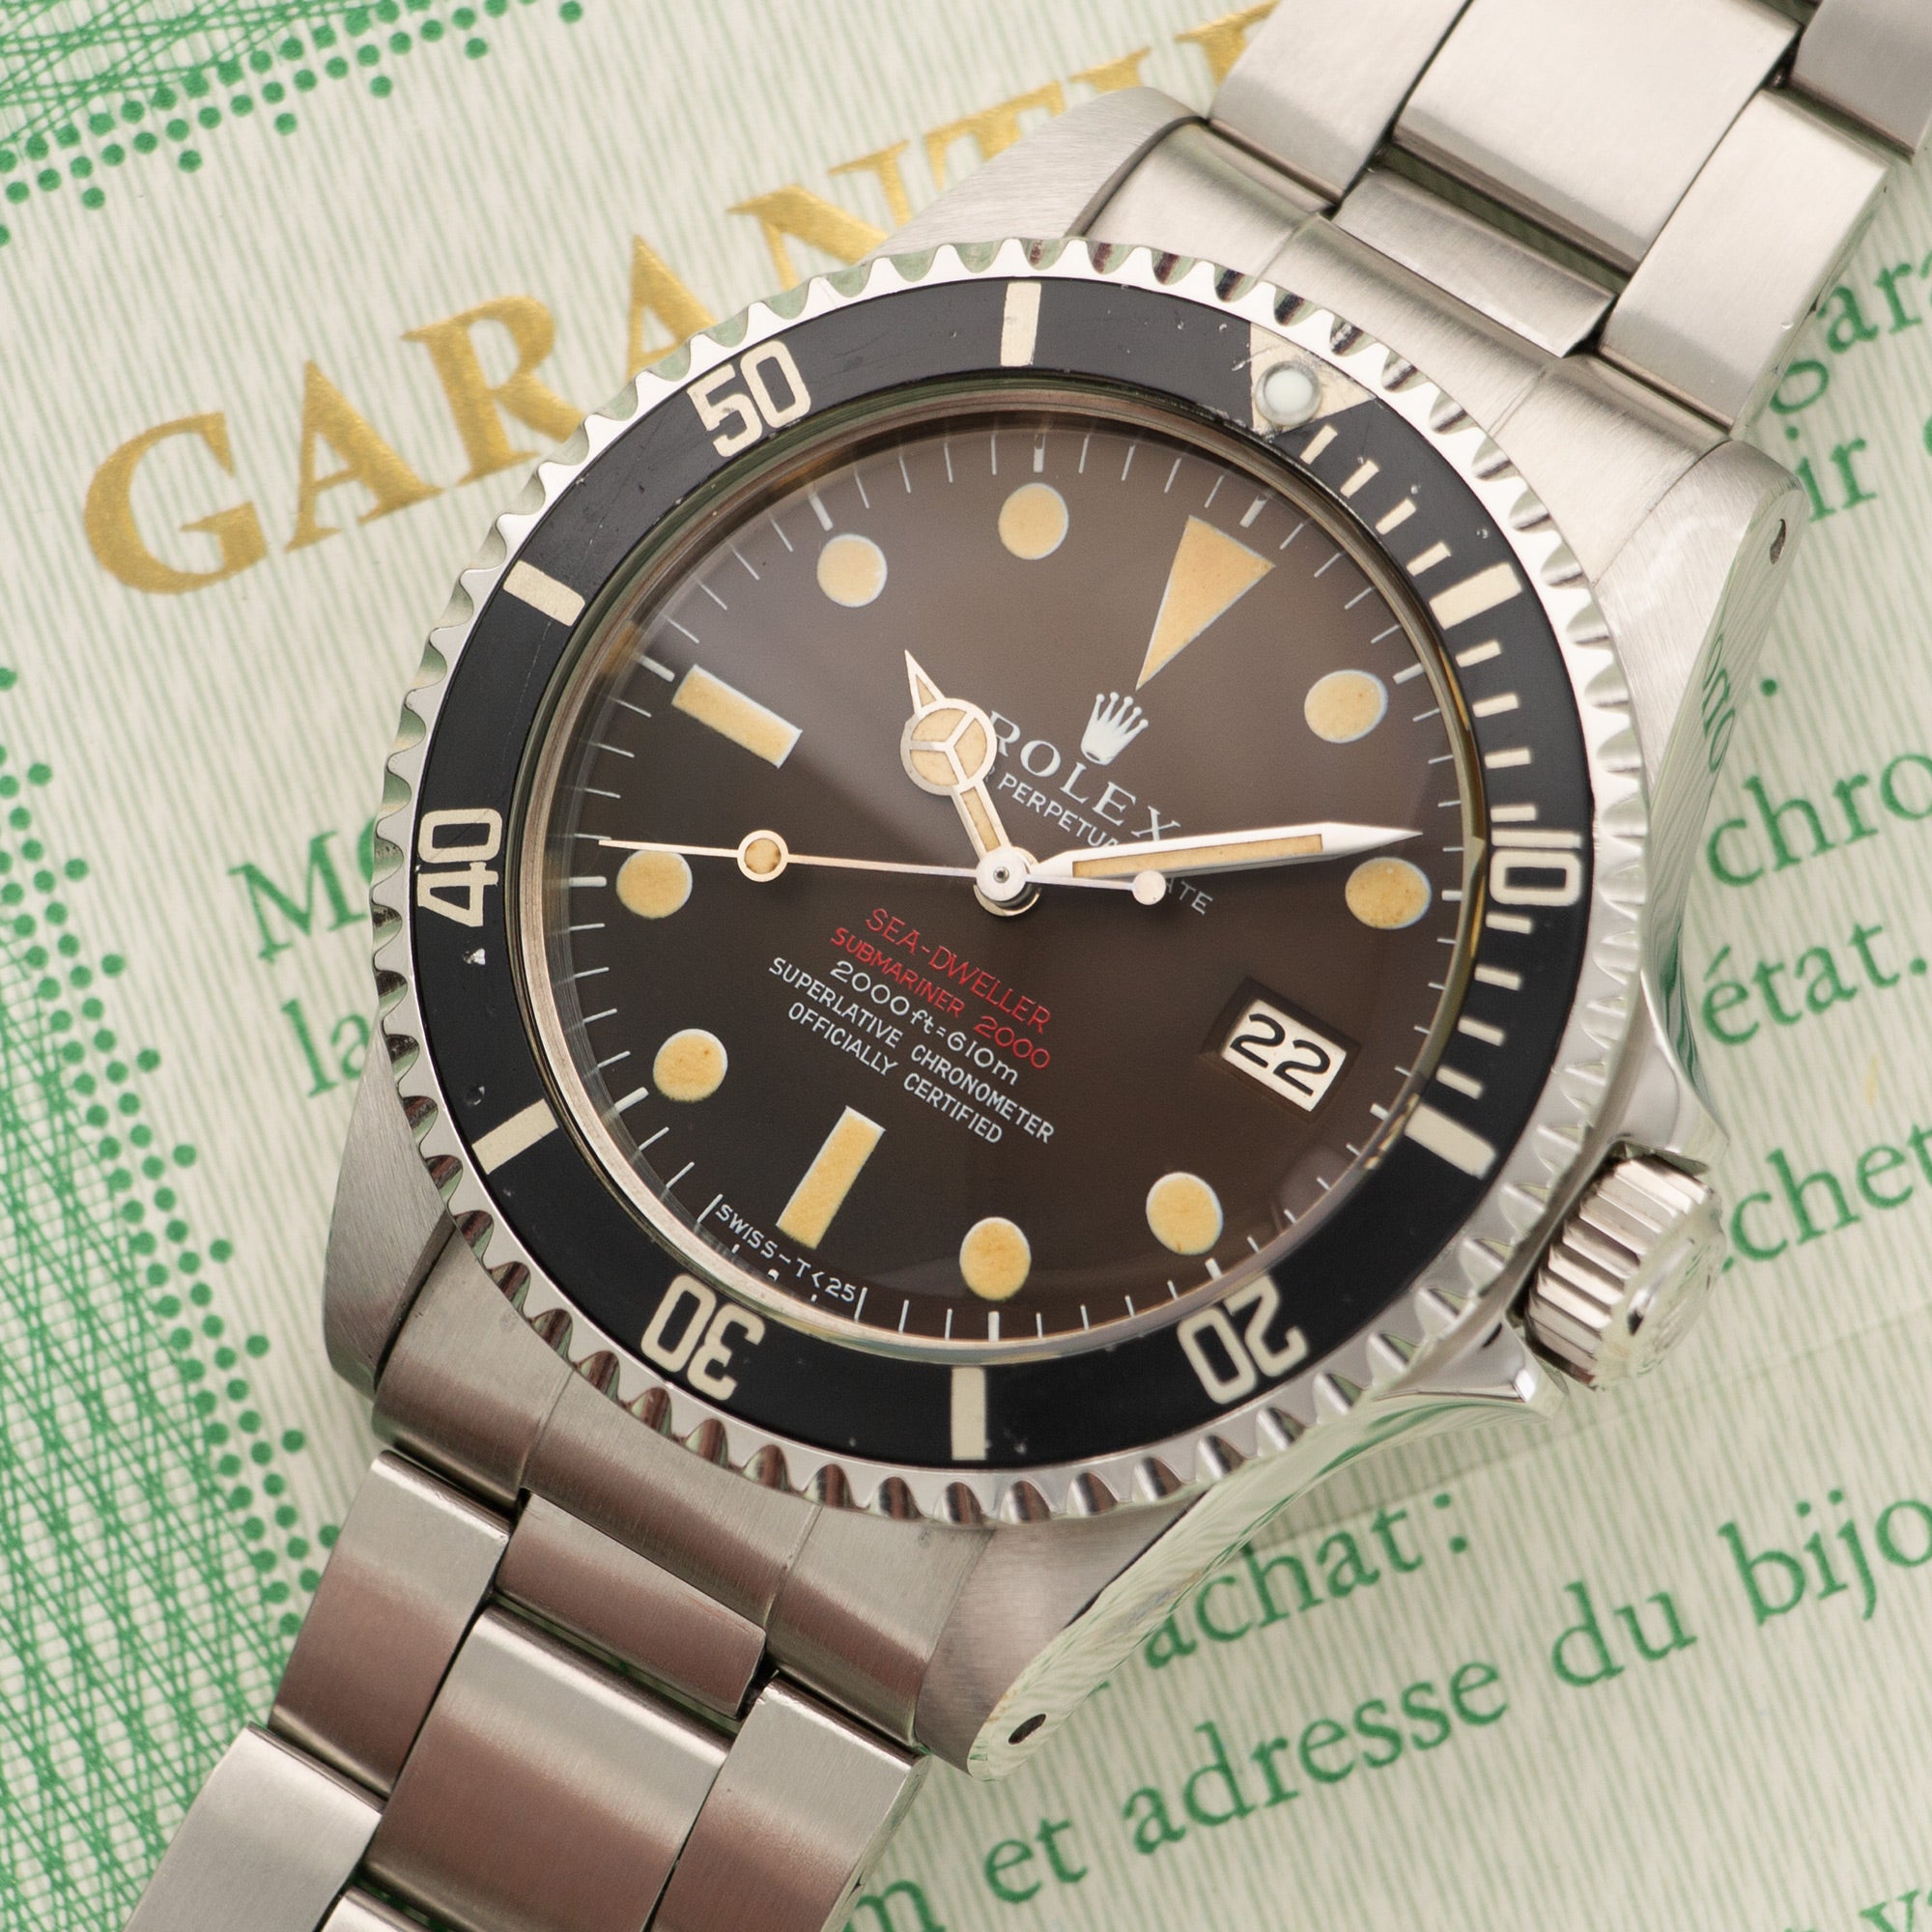 Rolex - Rolex Sea-Dweller Tropical Watch Ref. 1665, with Original Box and Papers, Crica 1972 - The Keystone Watches